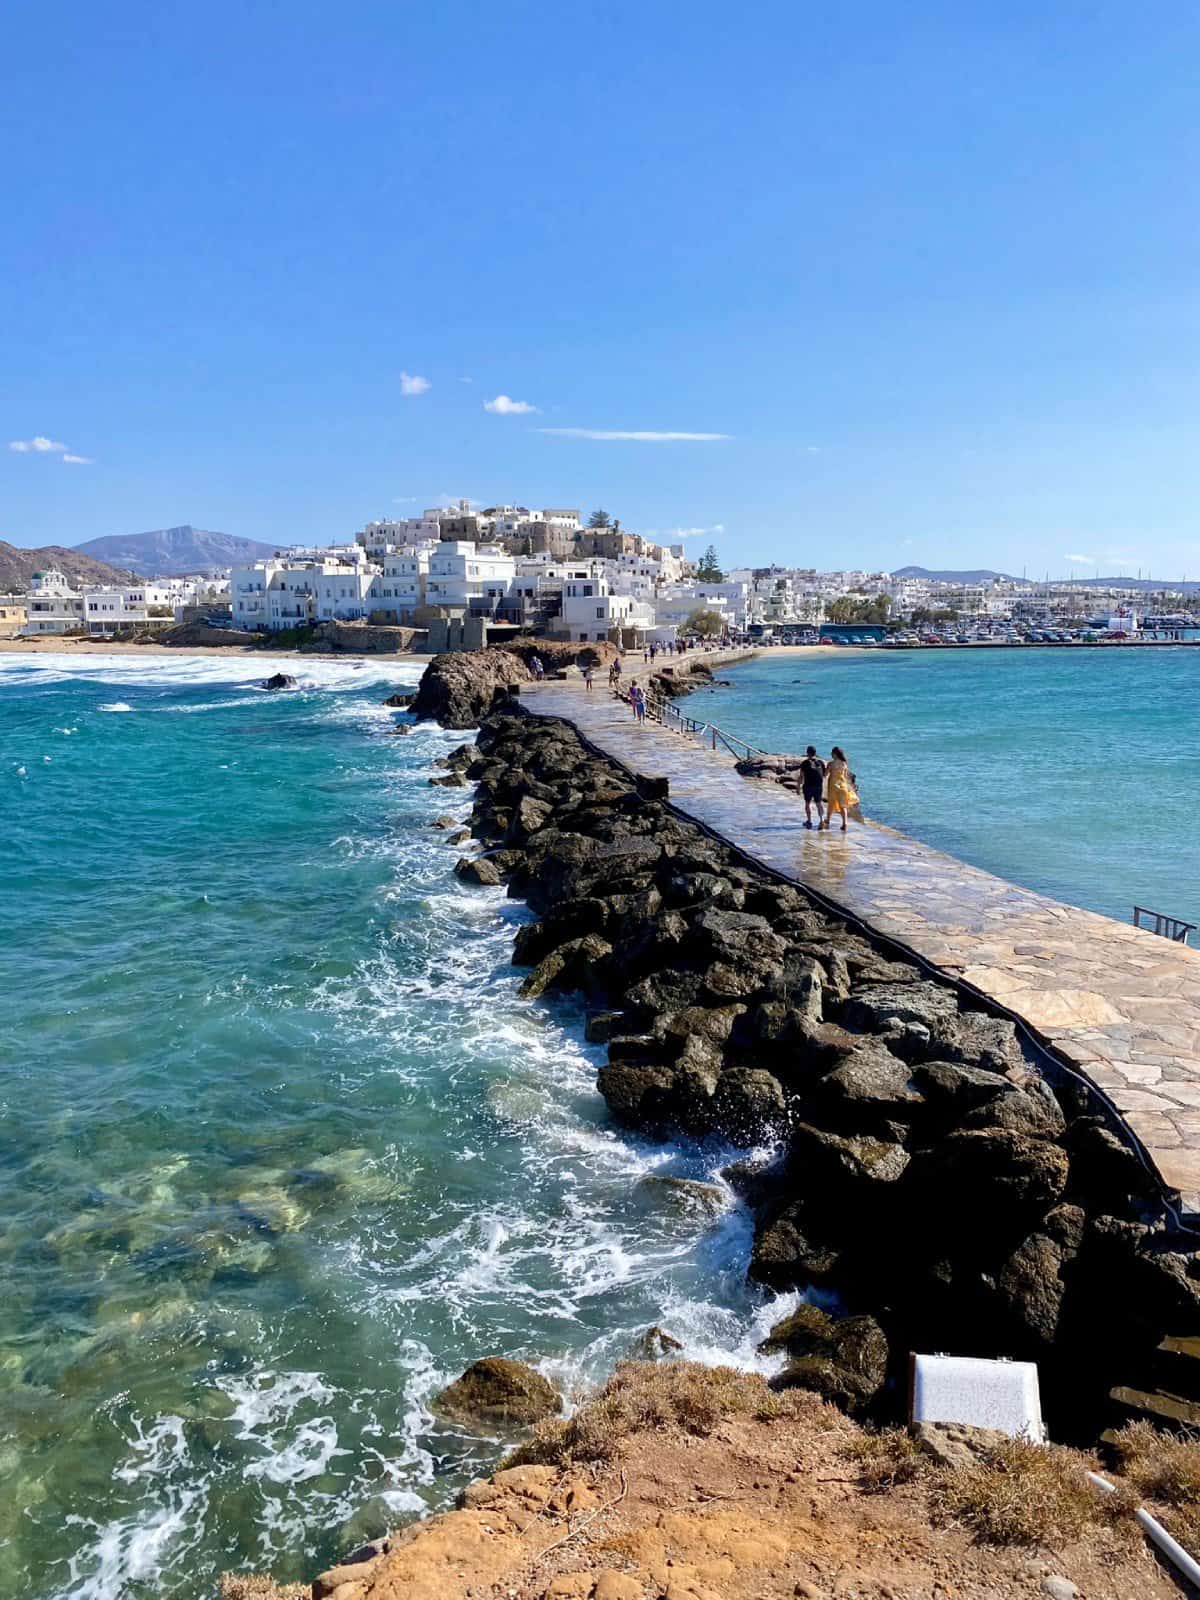 The spakrling waters of Naxos Town - what to do in Naxos, Greece